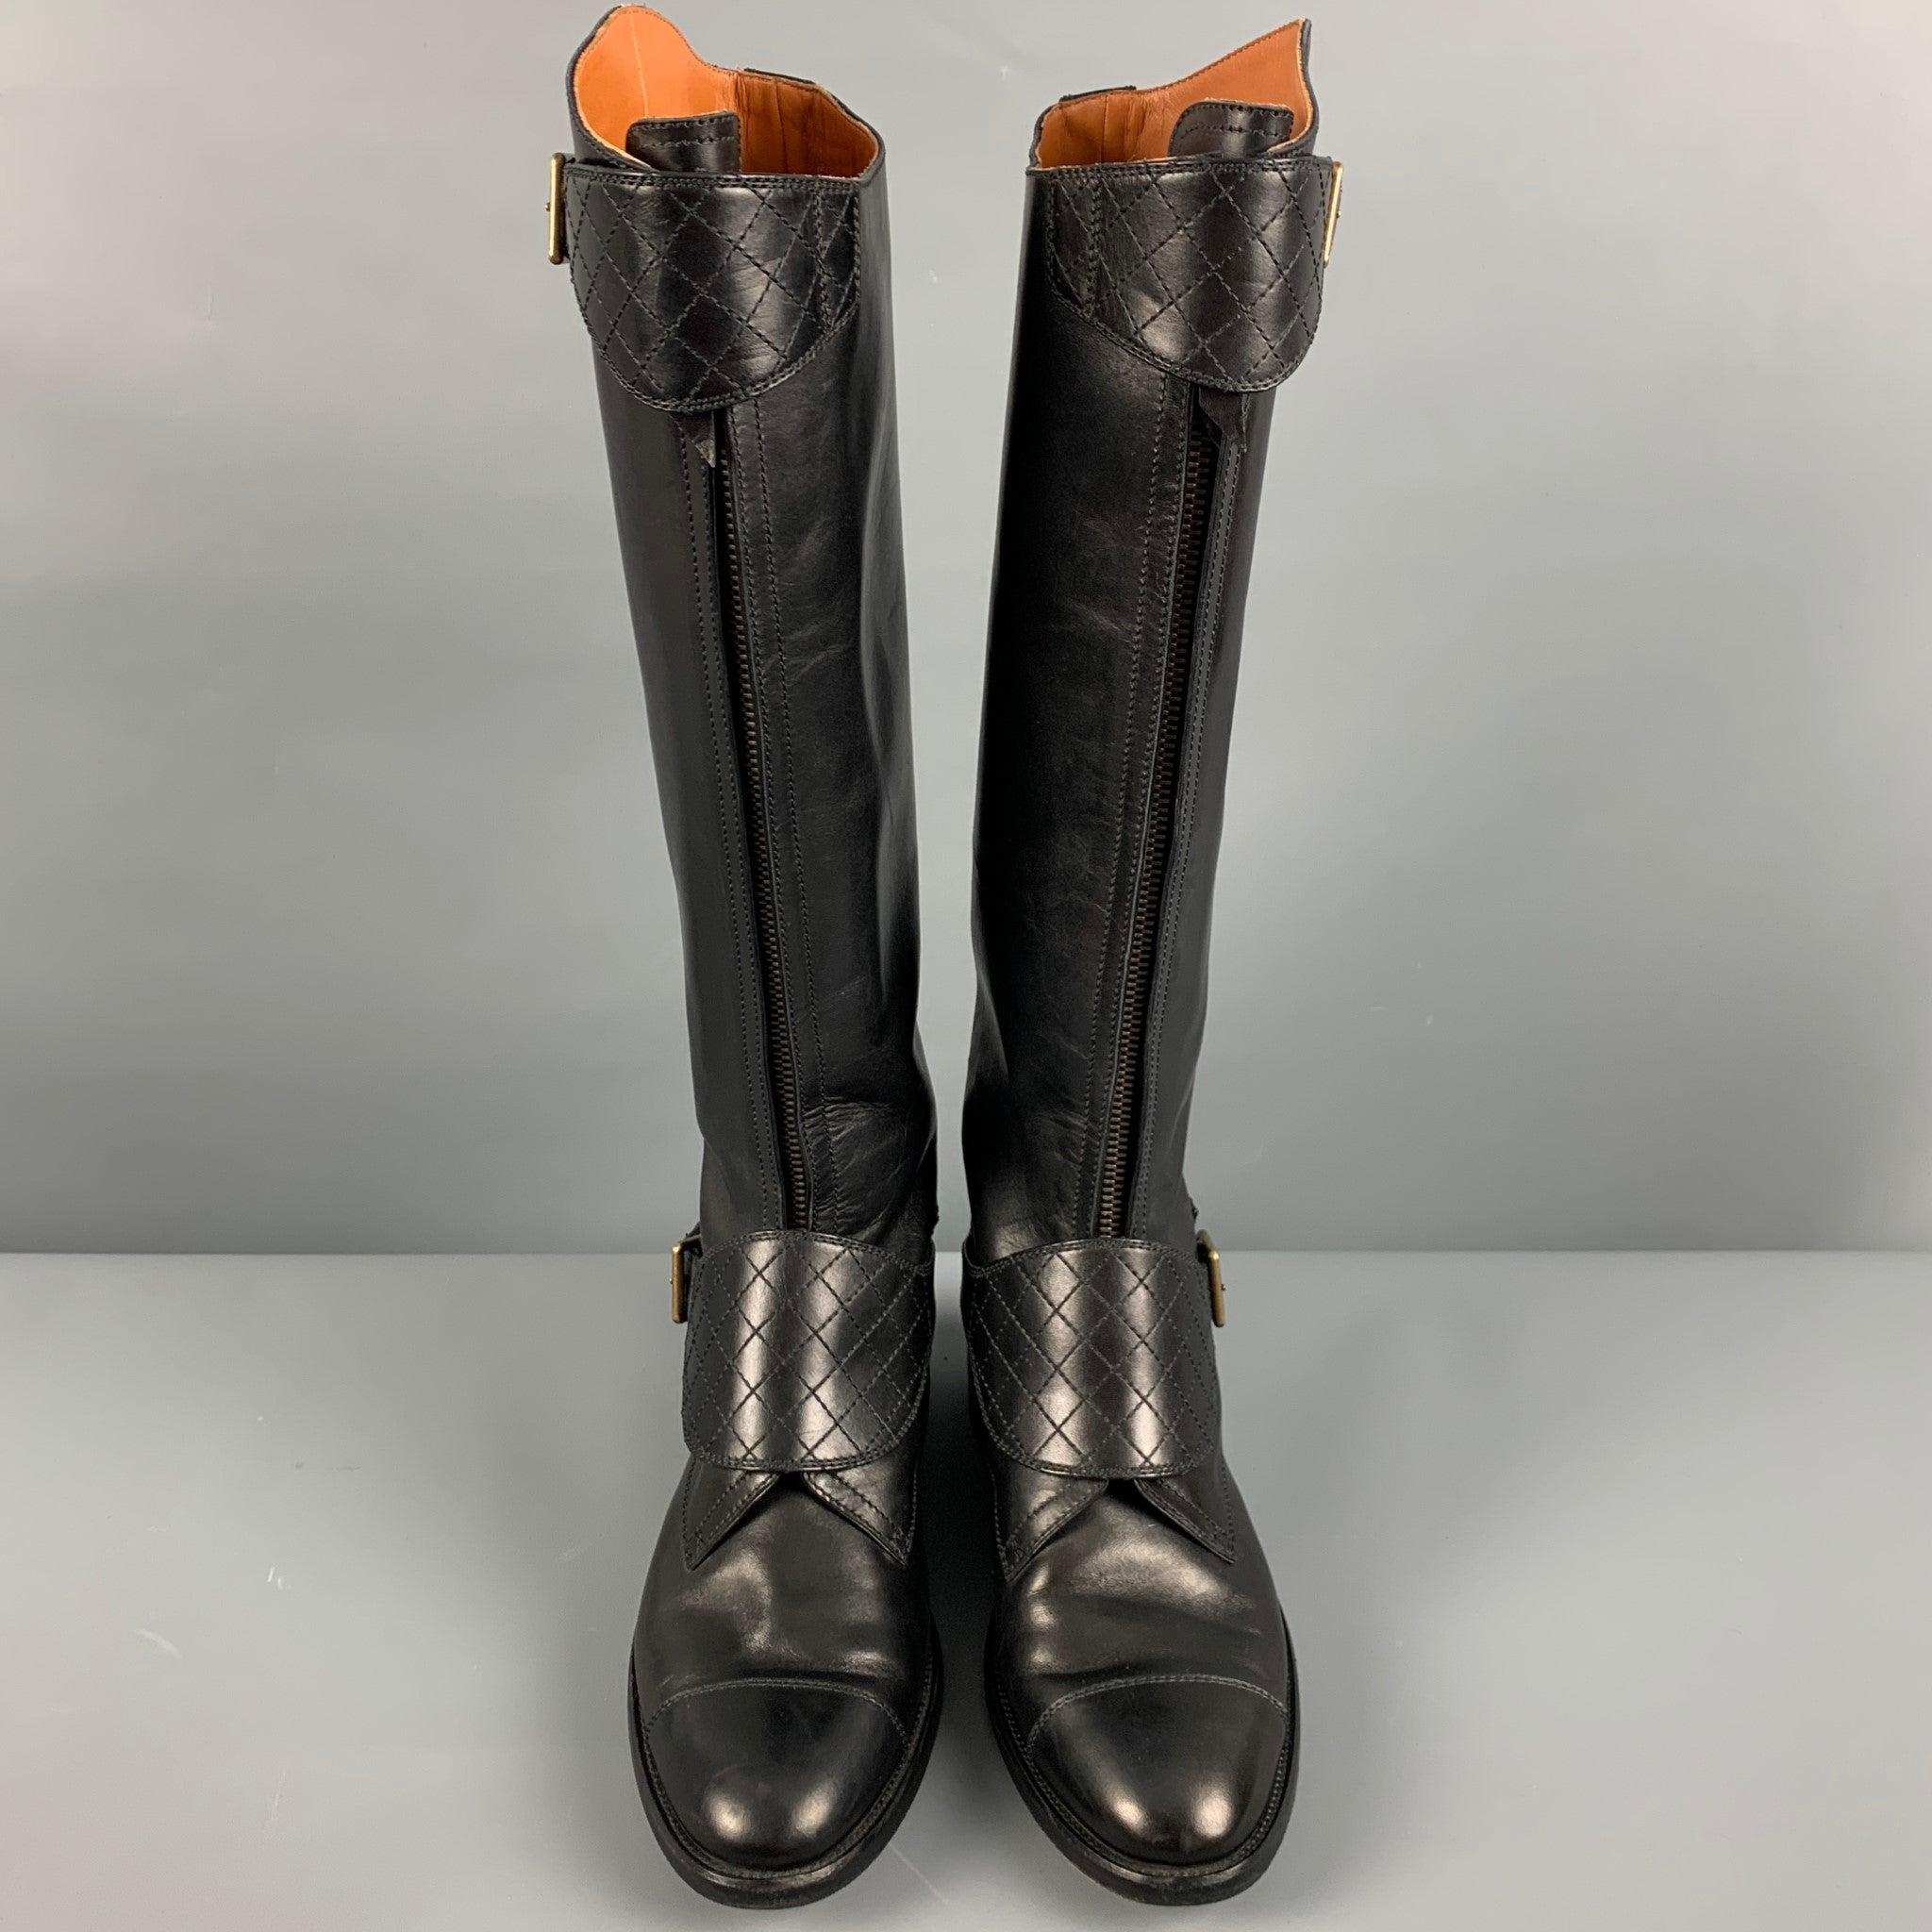 Women's CHANEL Size 10 Black Leather Riding Boots